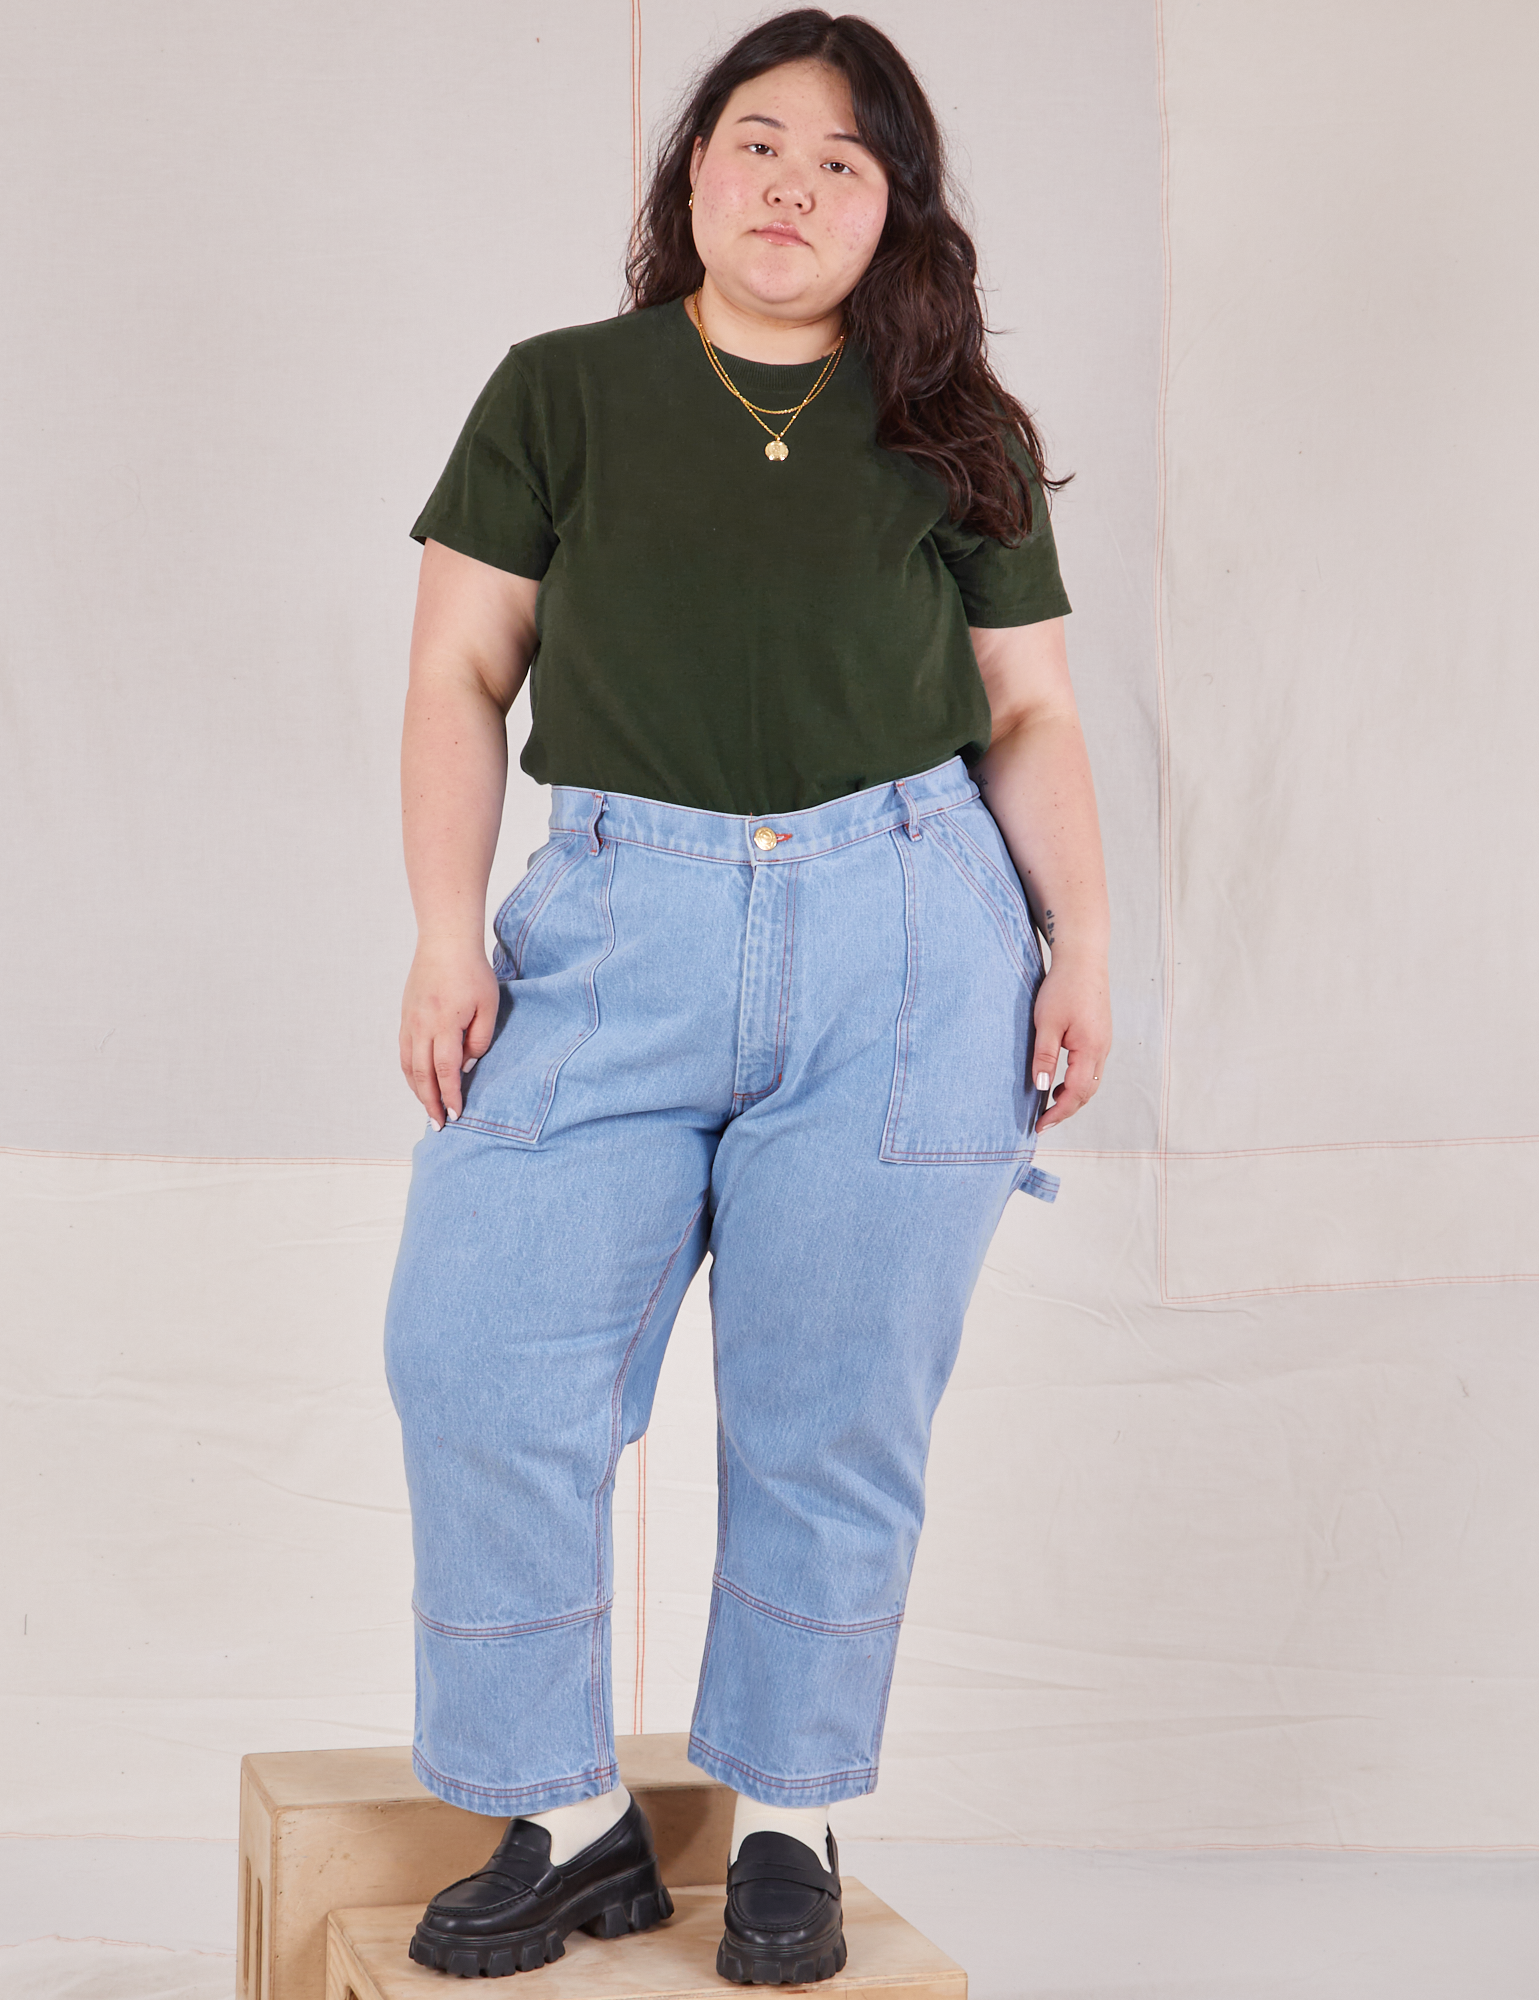 Ashley is wearing Organic Vintage Tee in Swamp Green tucked into light wash Carpenter Jeans